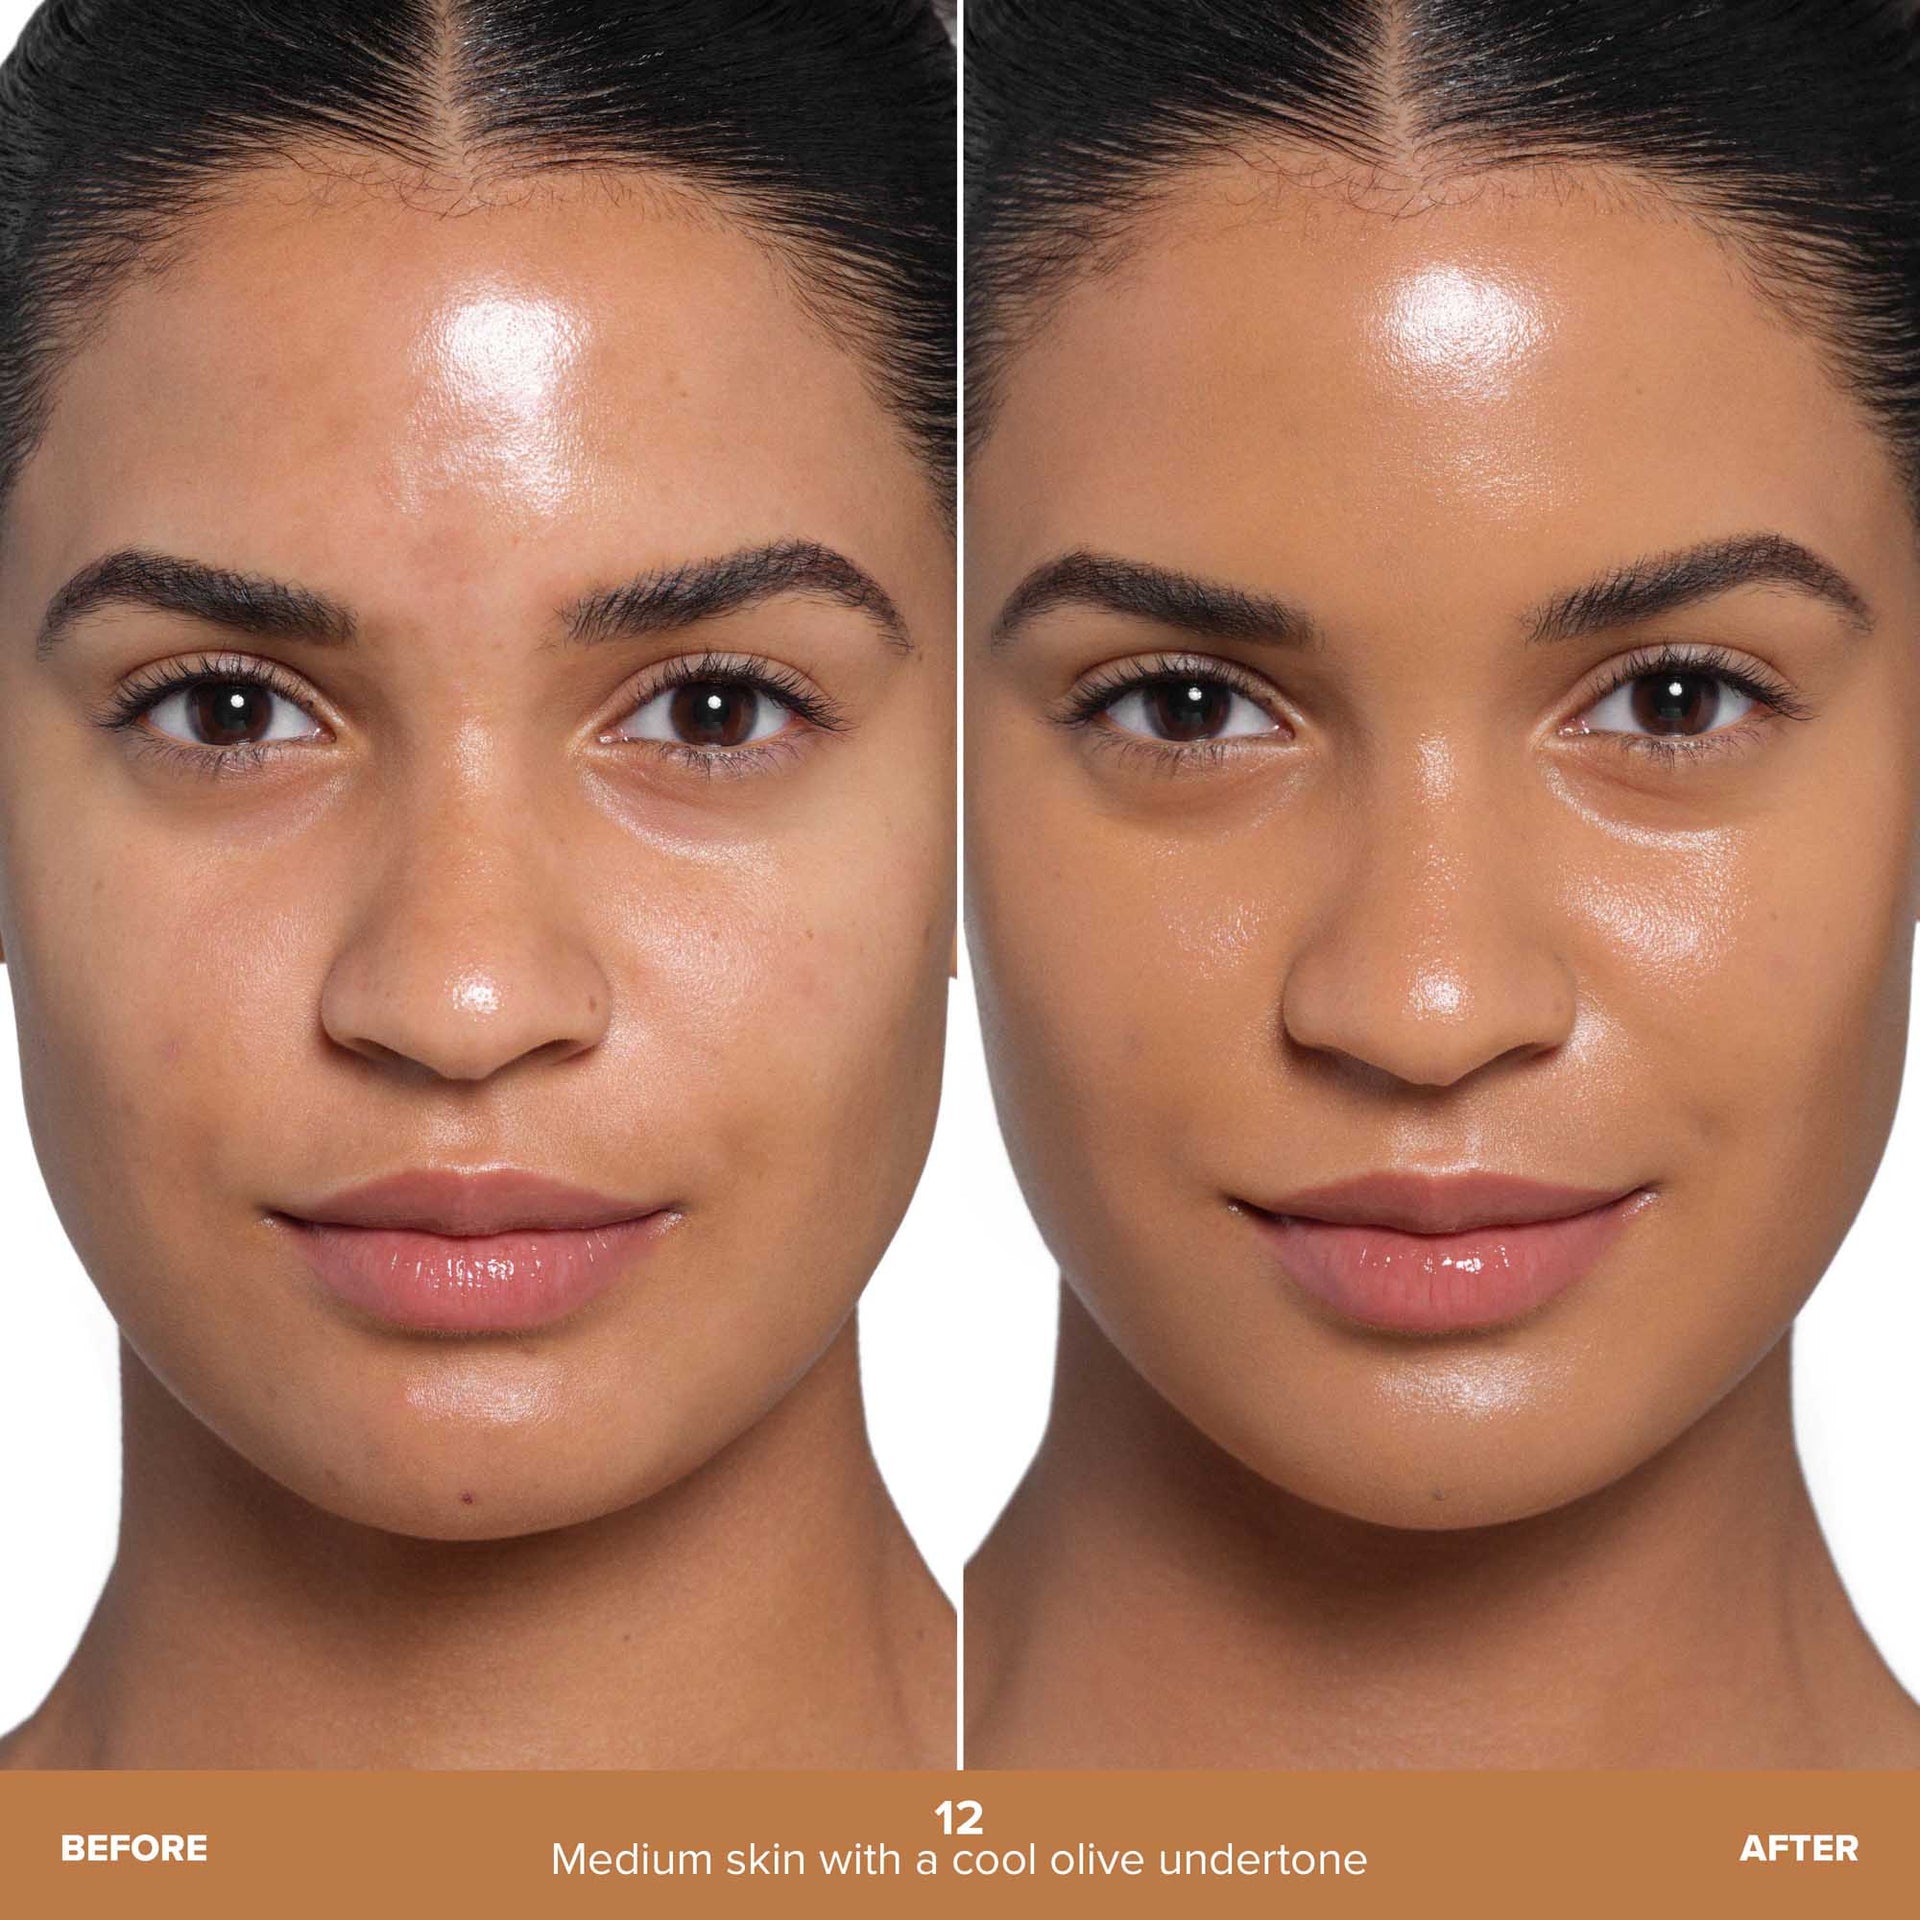 Shade 12 | Beauty Balm Serum Boosted Skin Tint Before & After - Shade 12